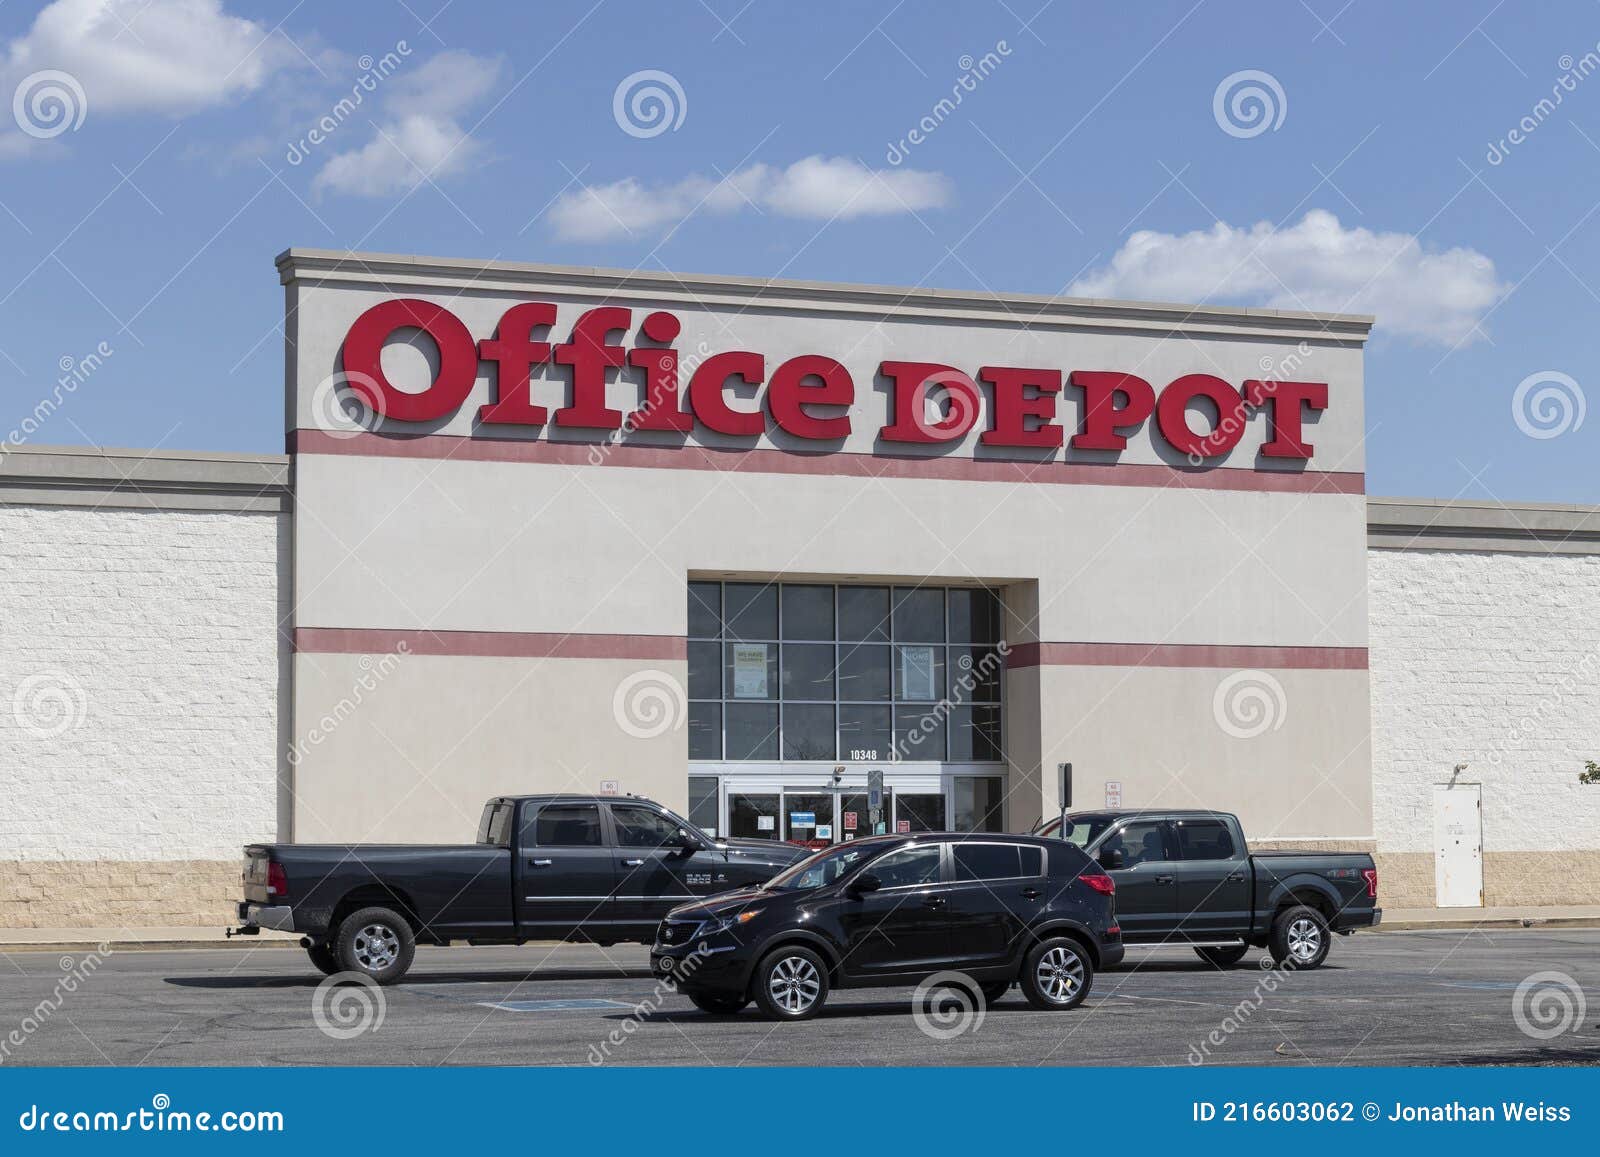 4 205 Office Depot Photos Free Royalty Free Stock Photos From Dreamstime